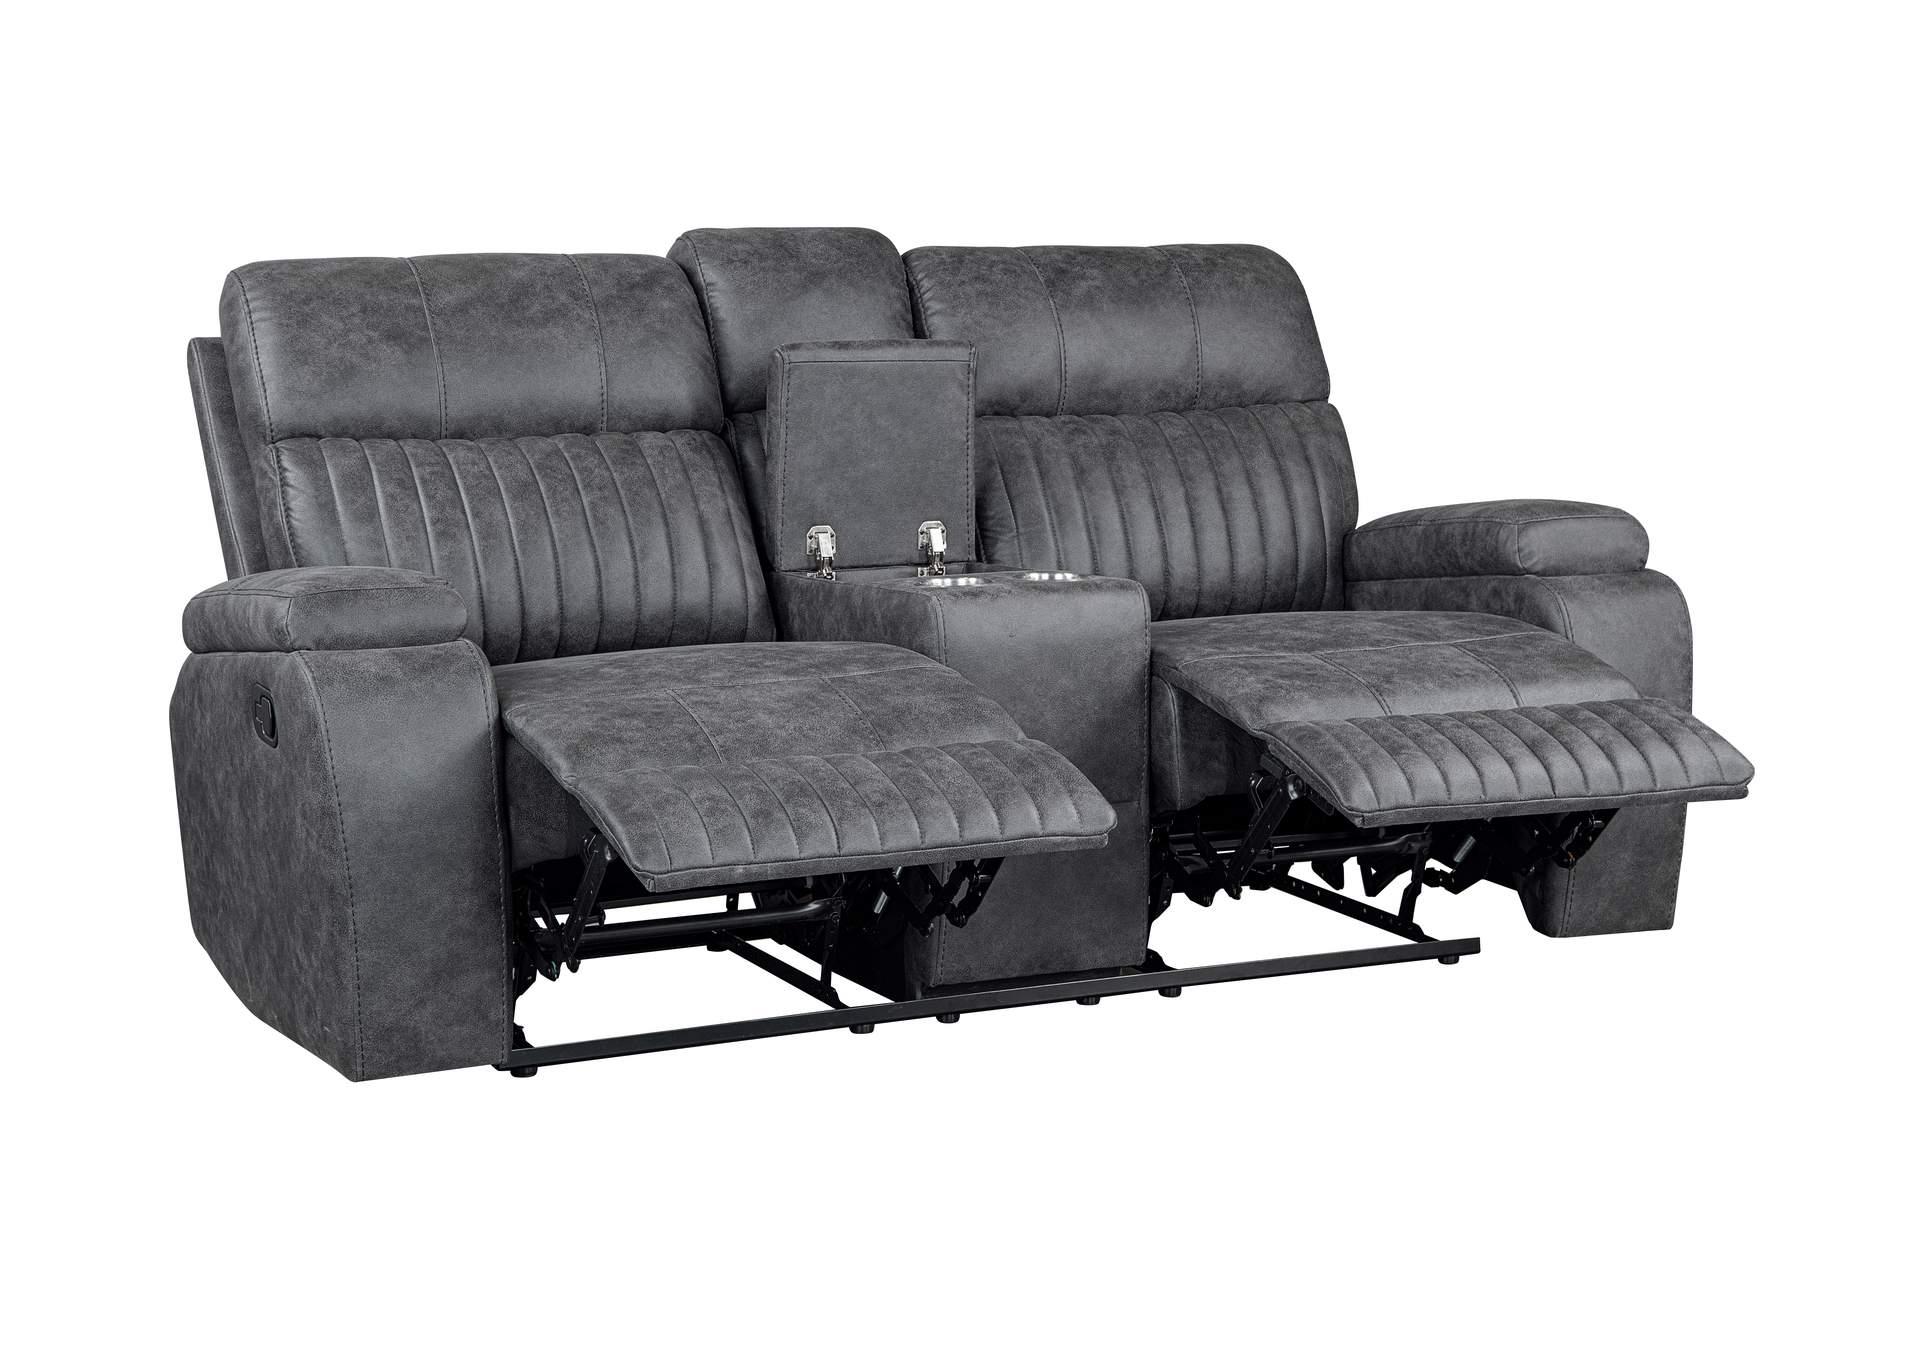 Lane Furniture Dual Reclining Sofa in Gray Fabric and Dual Reclining Love Seat with Storage Console